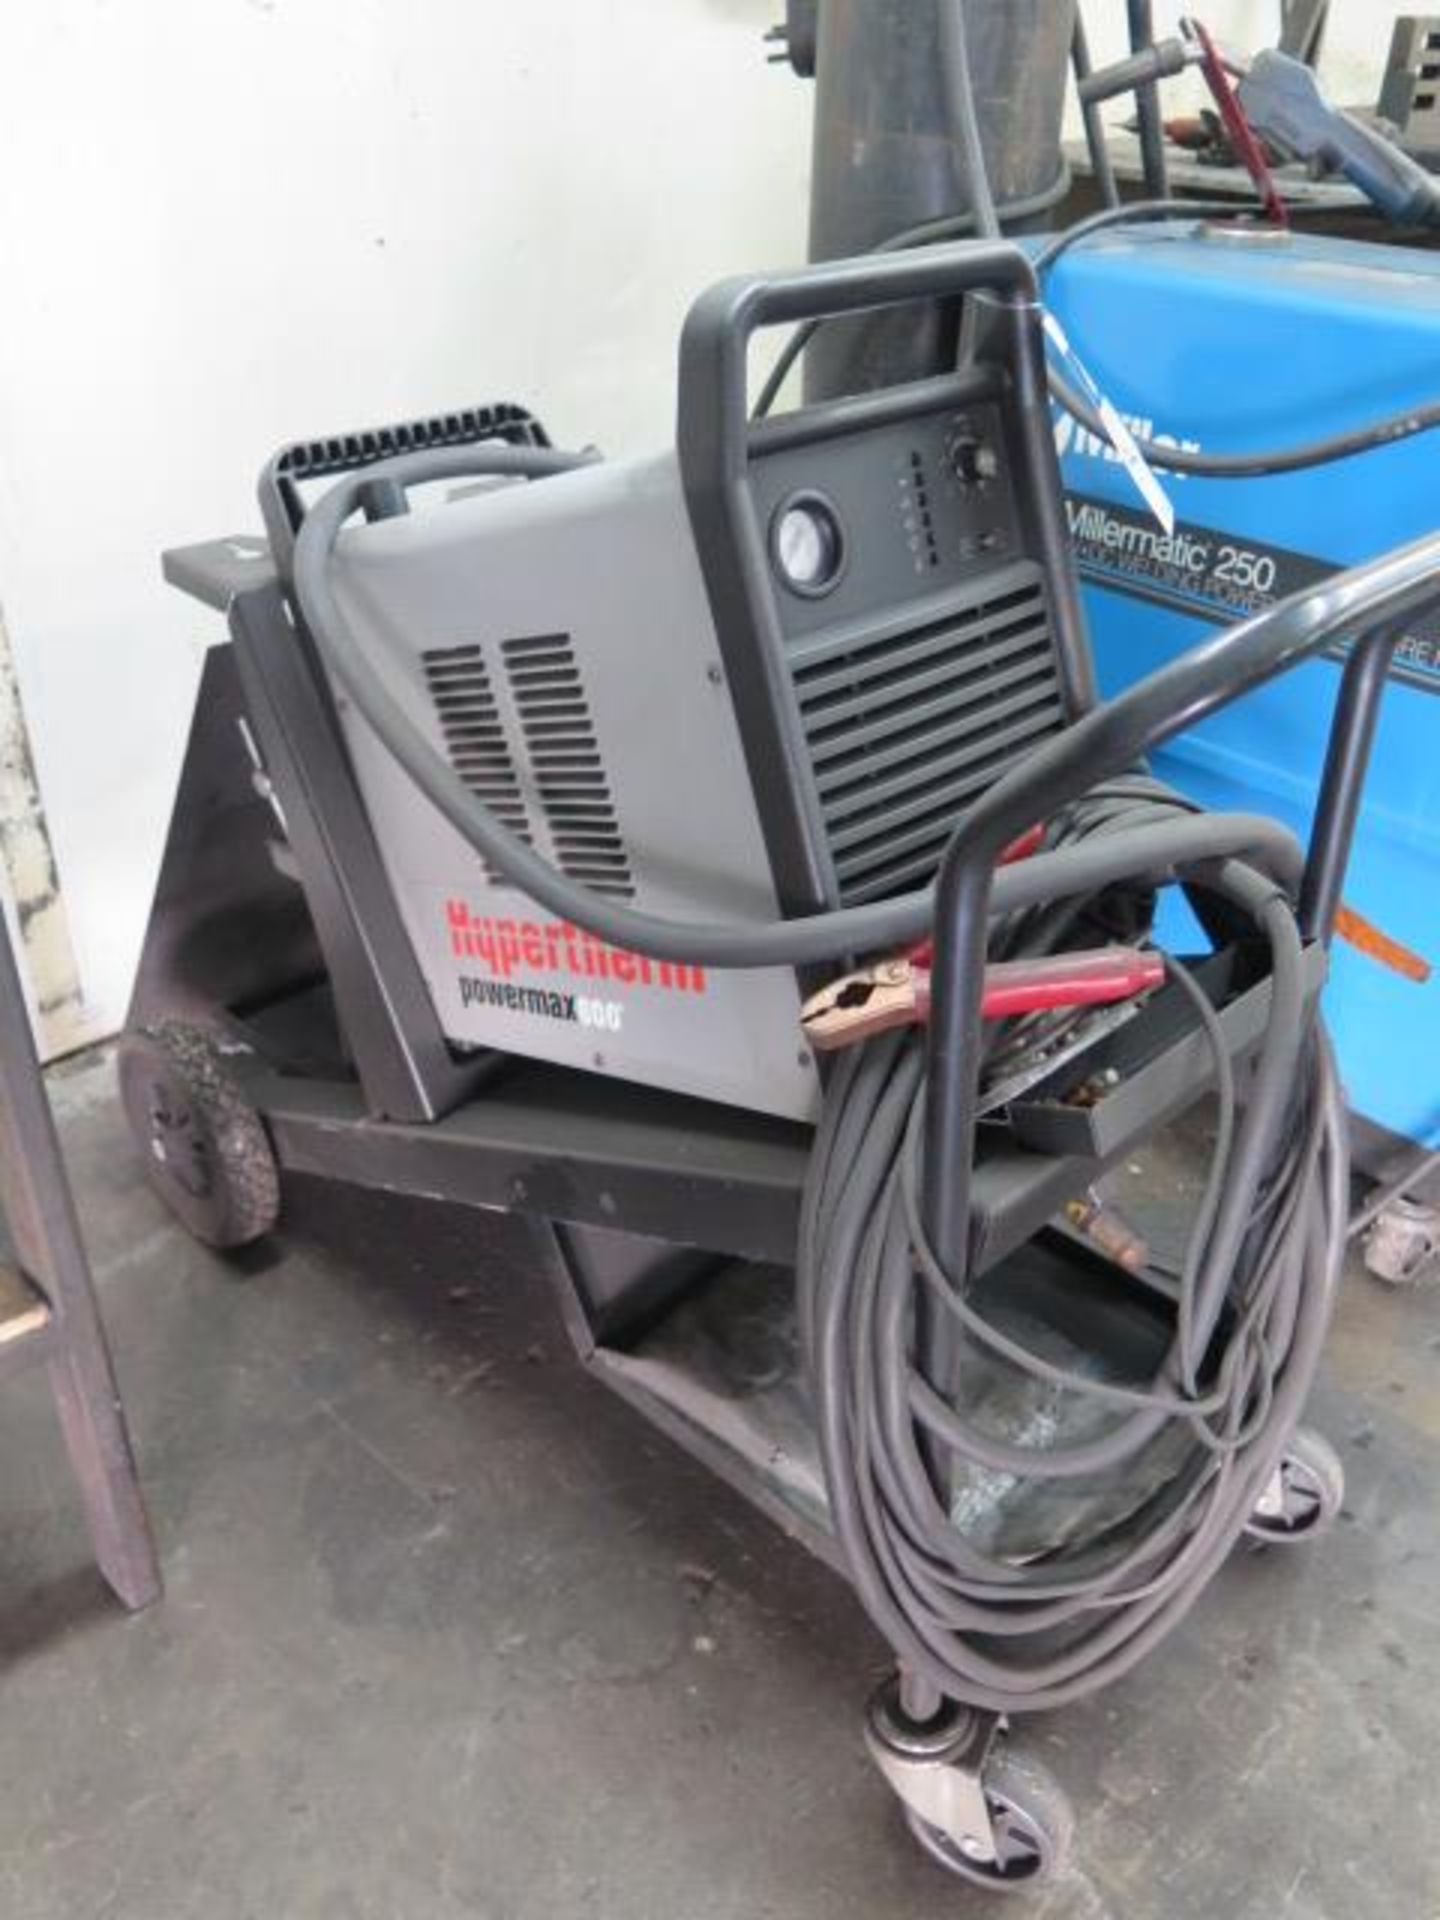 Hypertherm Powermax 600 Plasma Cutting Power Source w/ Cart (SOLD AS-IS - NO WARRANTY) - Image 2 of 9